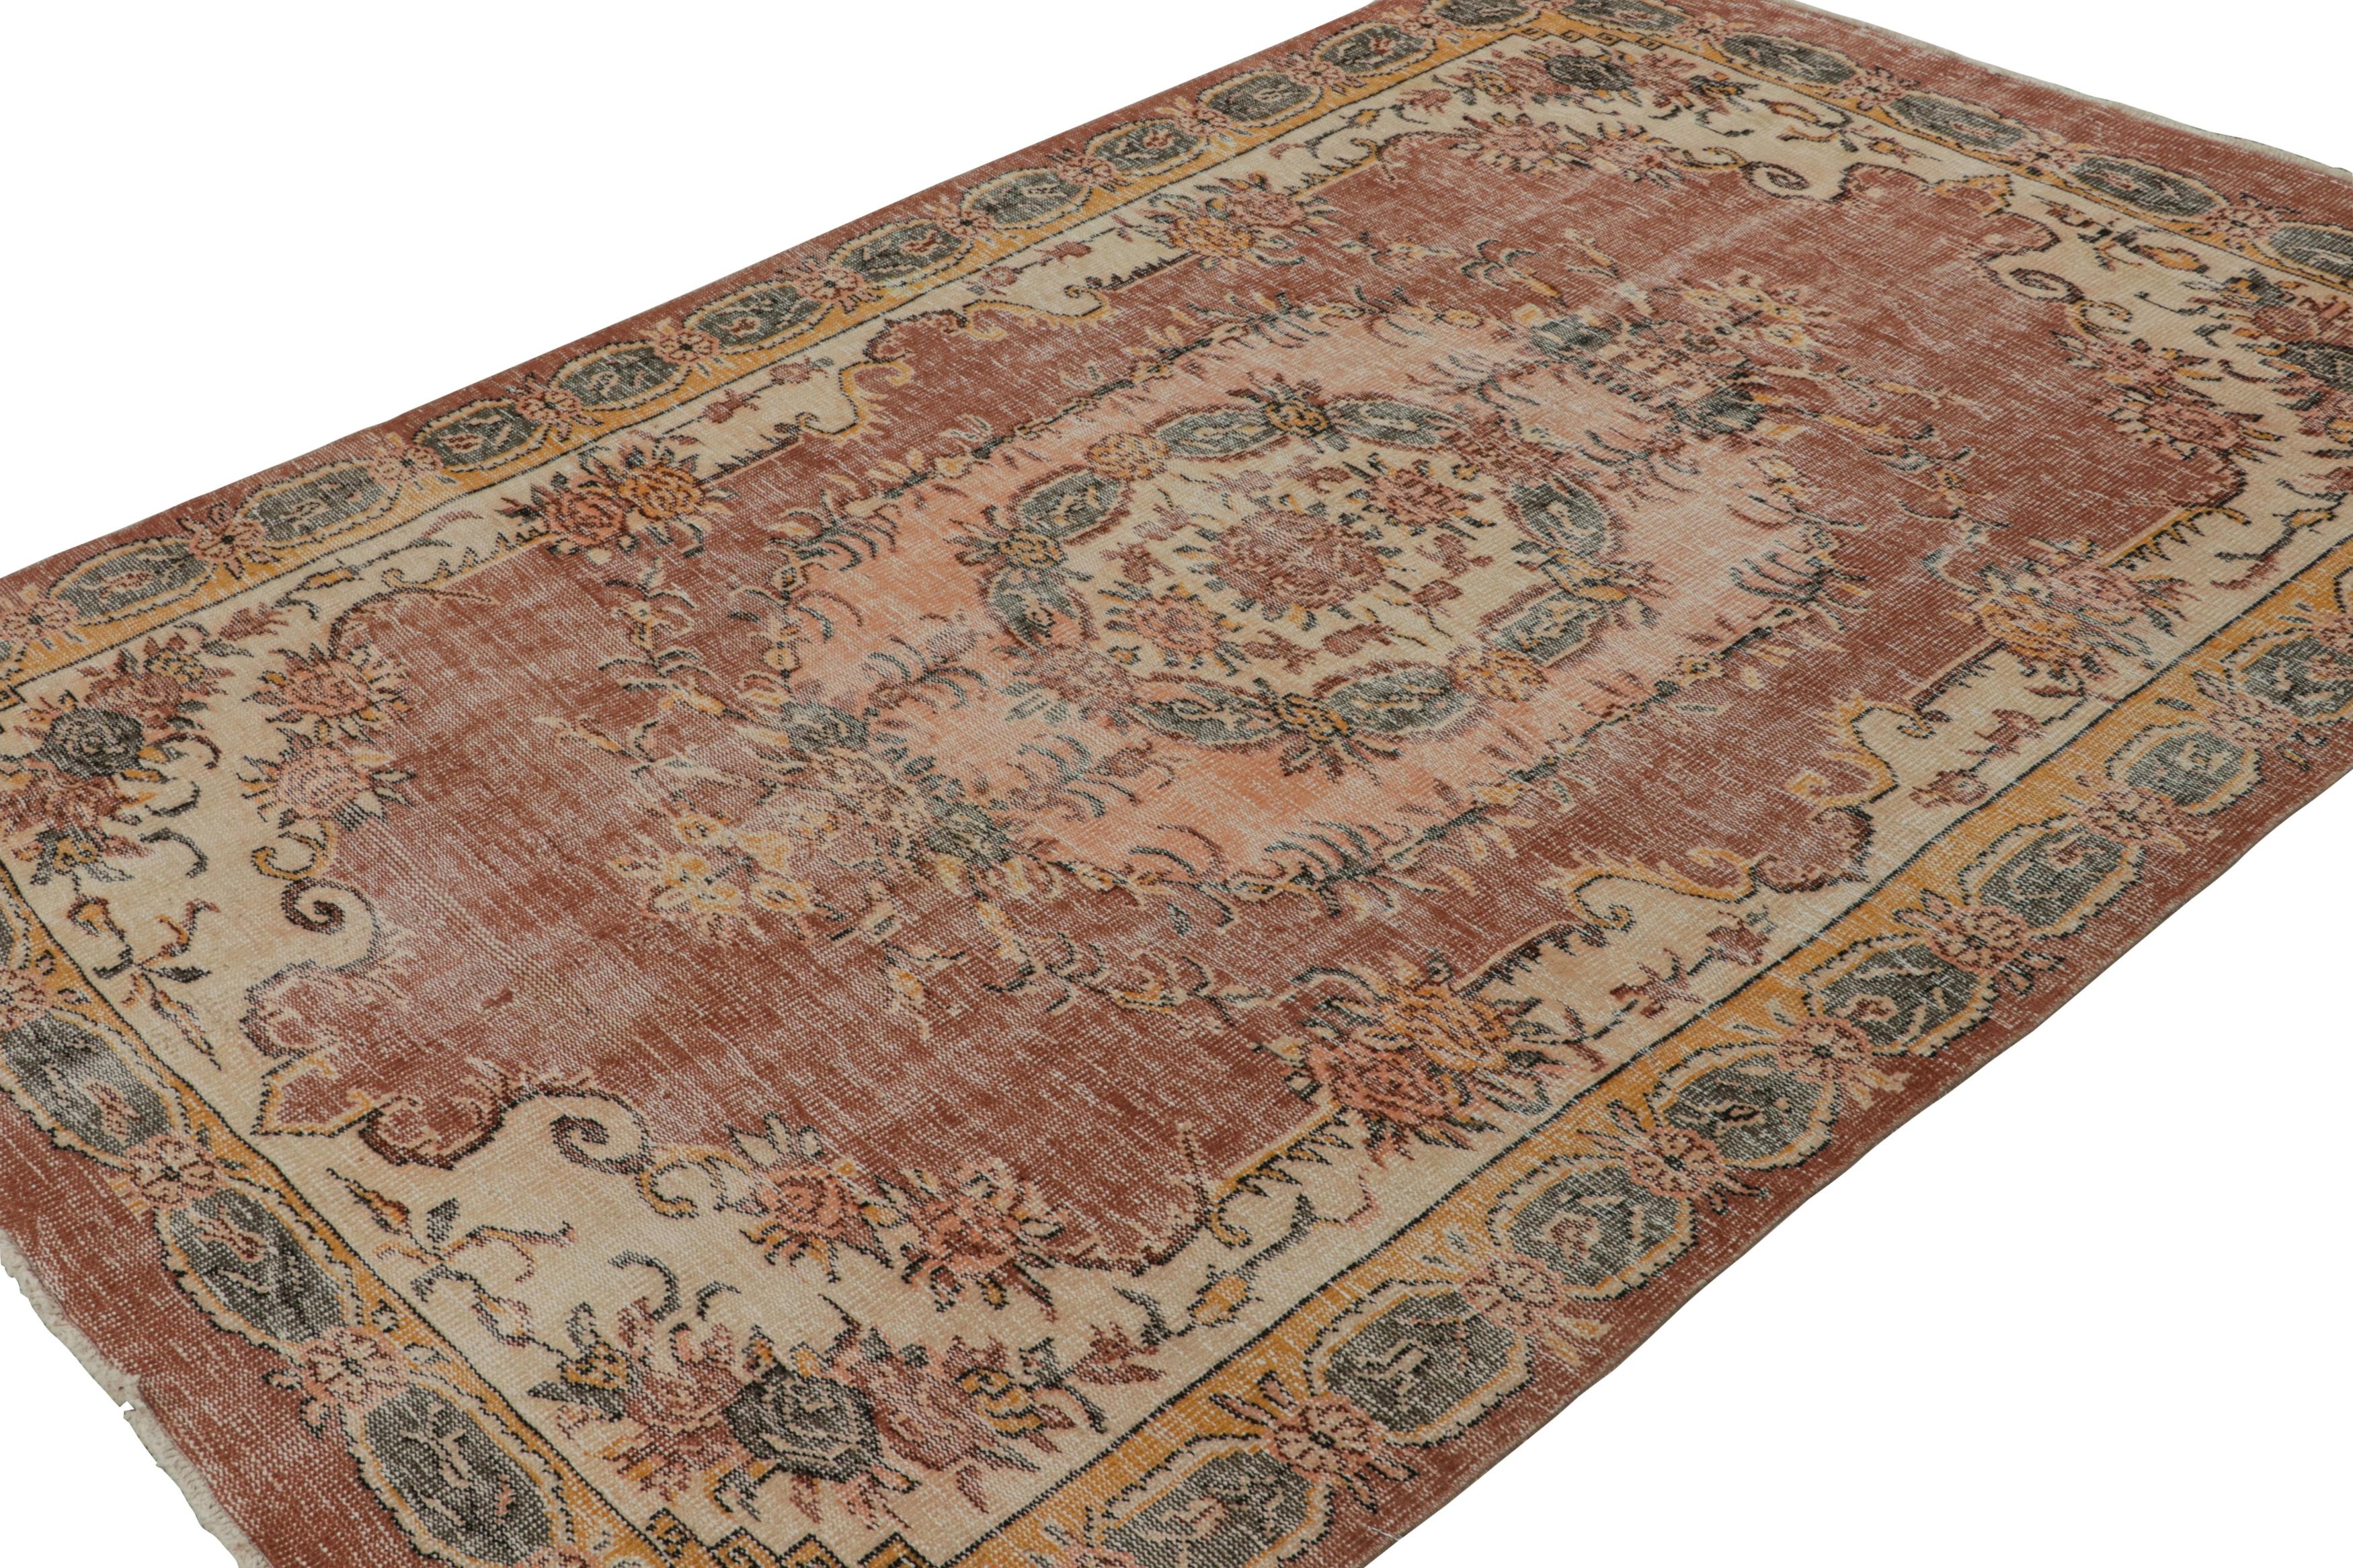 Hand-knotted in wool, circa 1960 - 1970, this 6x9 vintage French Savonnerie-inspired Müren rug is a modern interpretation of a Neoclassical style. 

On the design: 

With a modern Neoclassical interpretation, this vintage Zeki Müren rug,